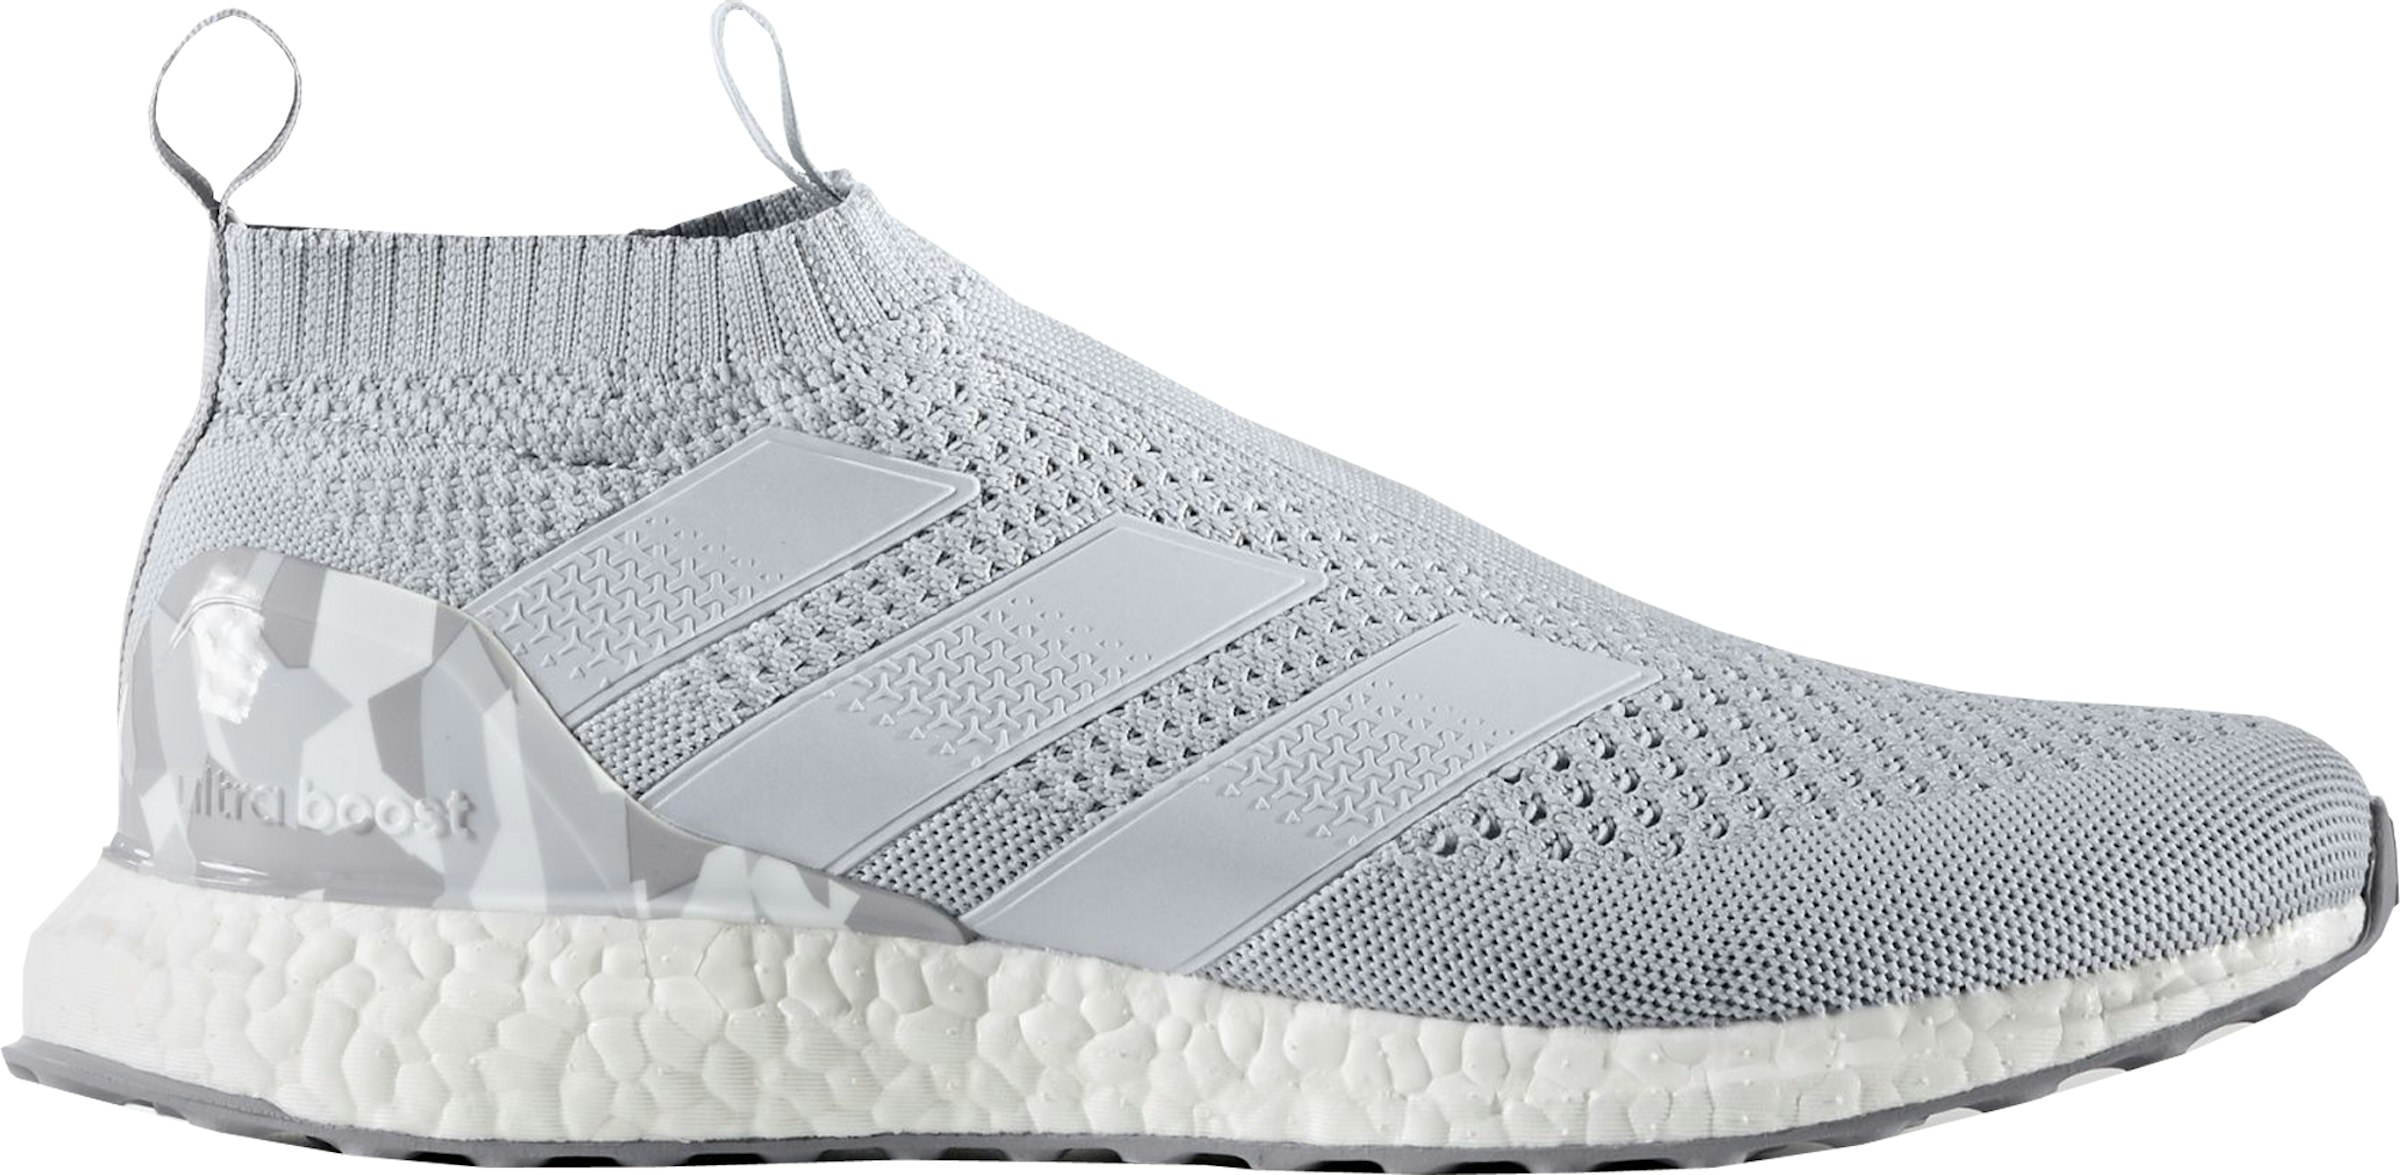 adidas Ultra Boost Grey Men's - BY9089 - US